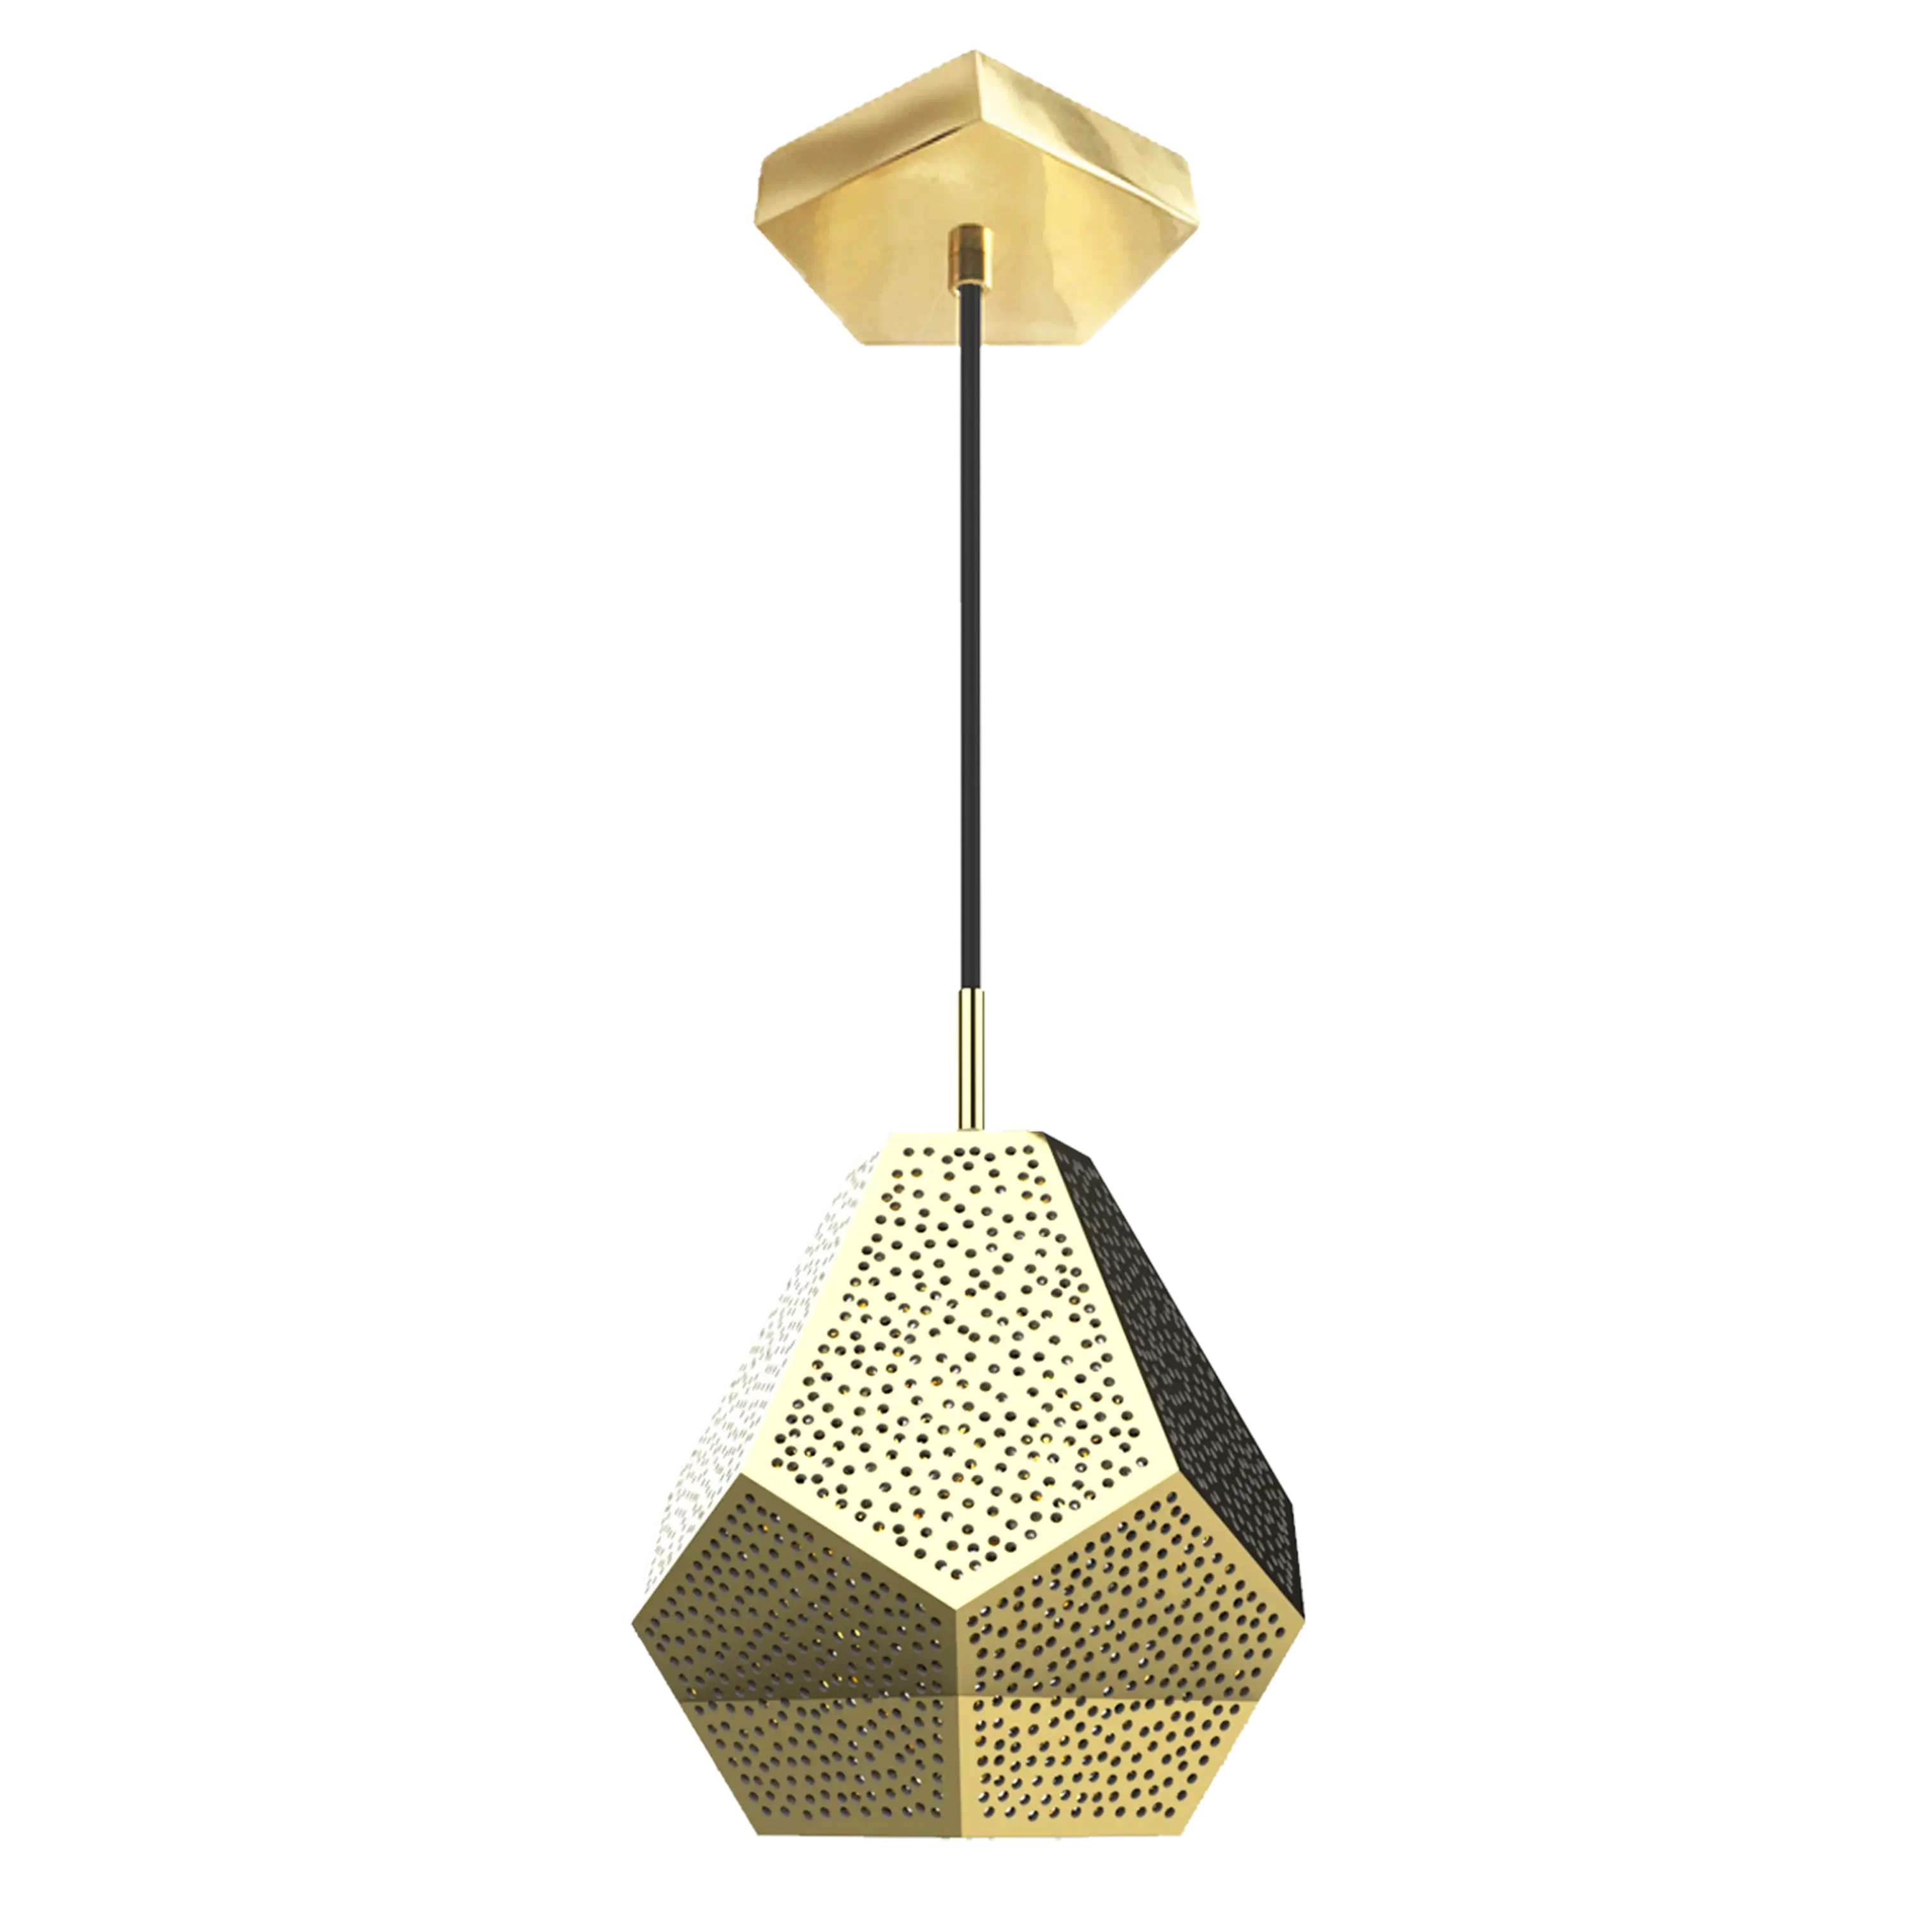 Dounia home Pendant light in  polished brass  made of metal, Model: Almas